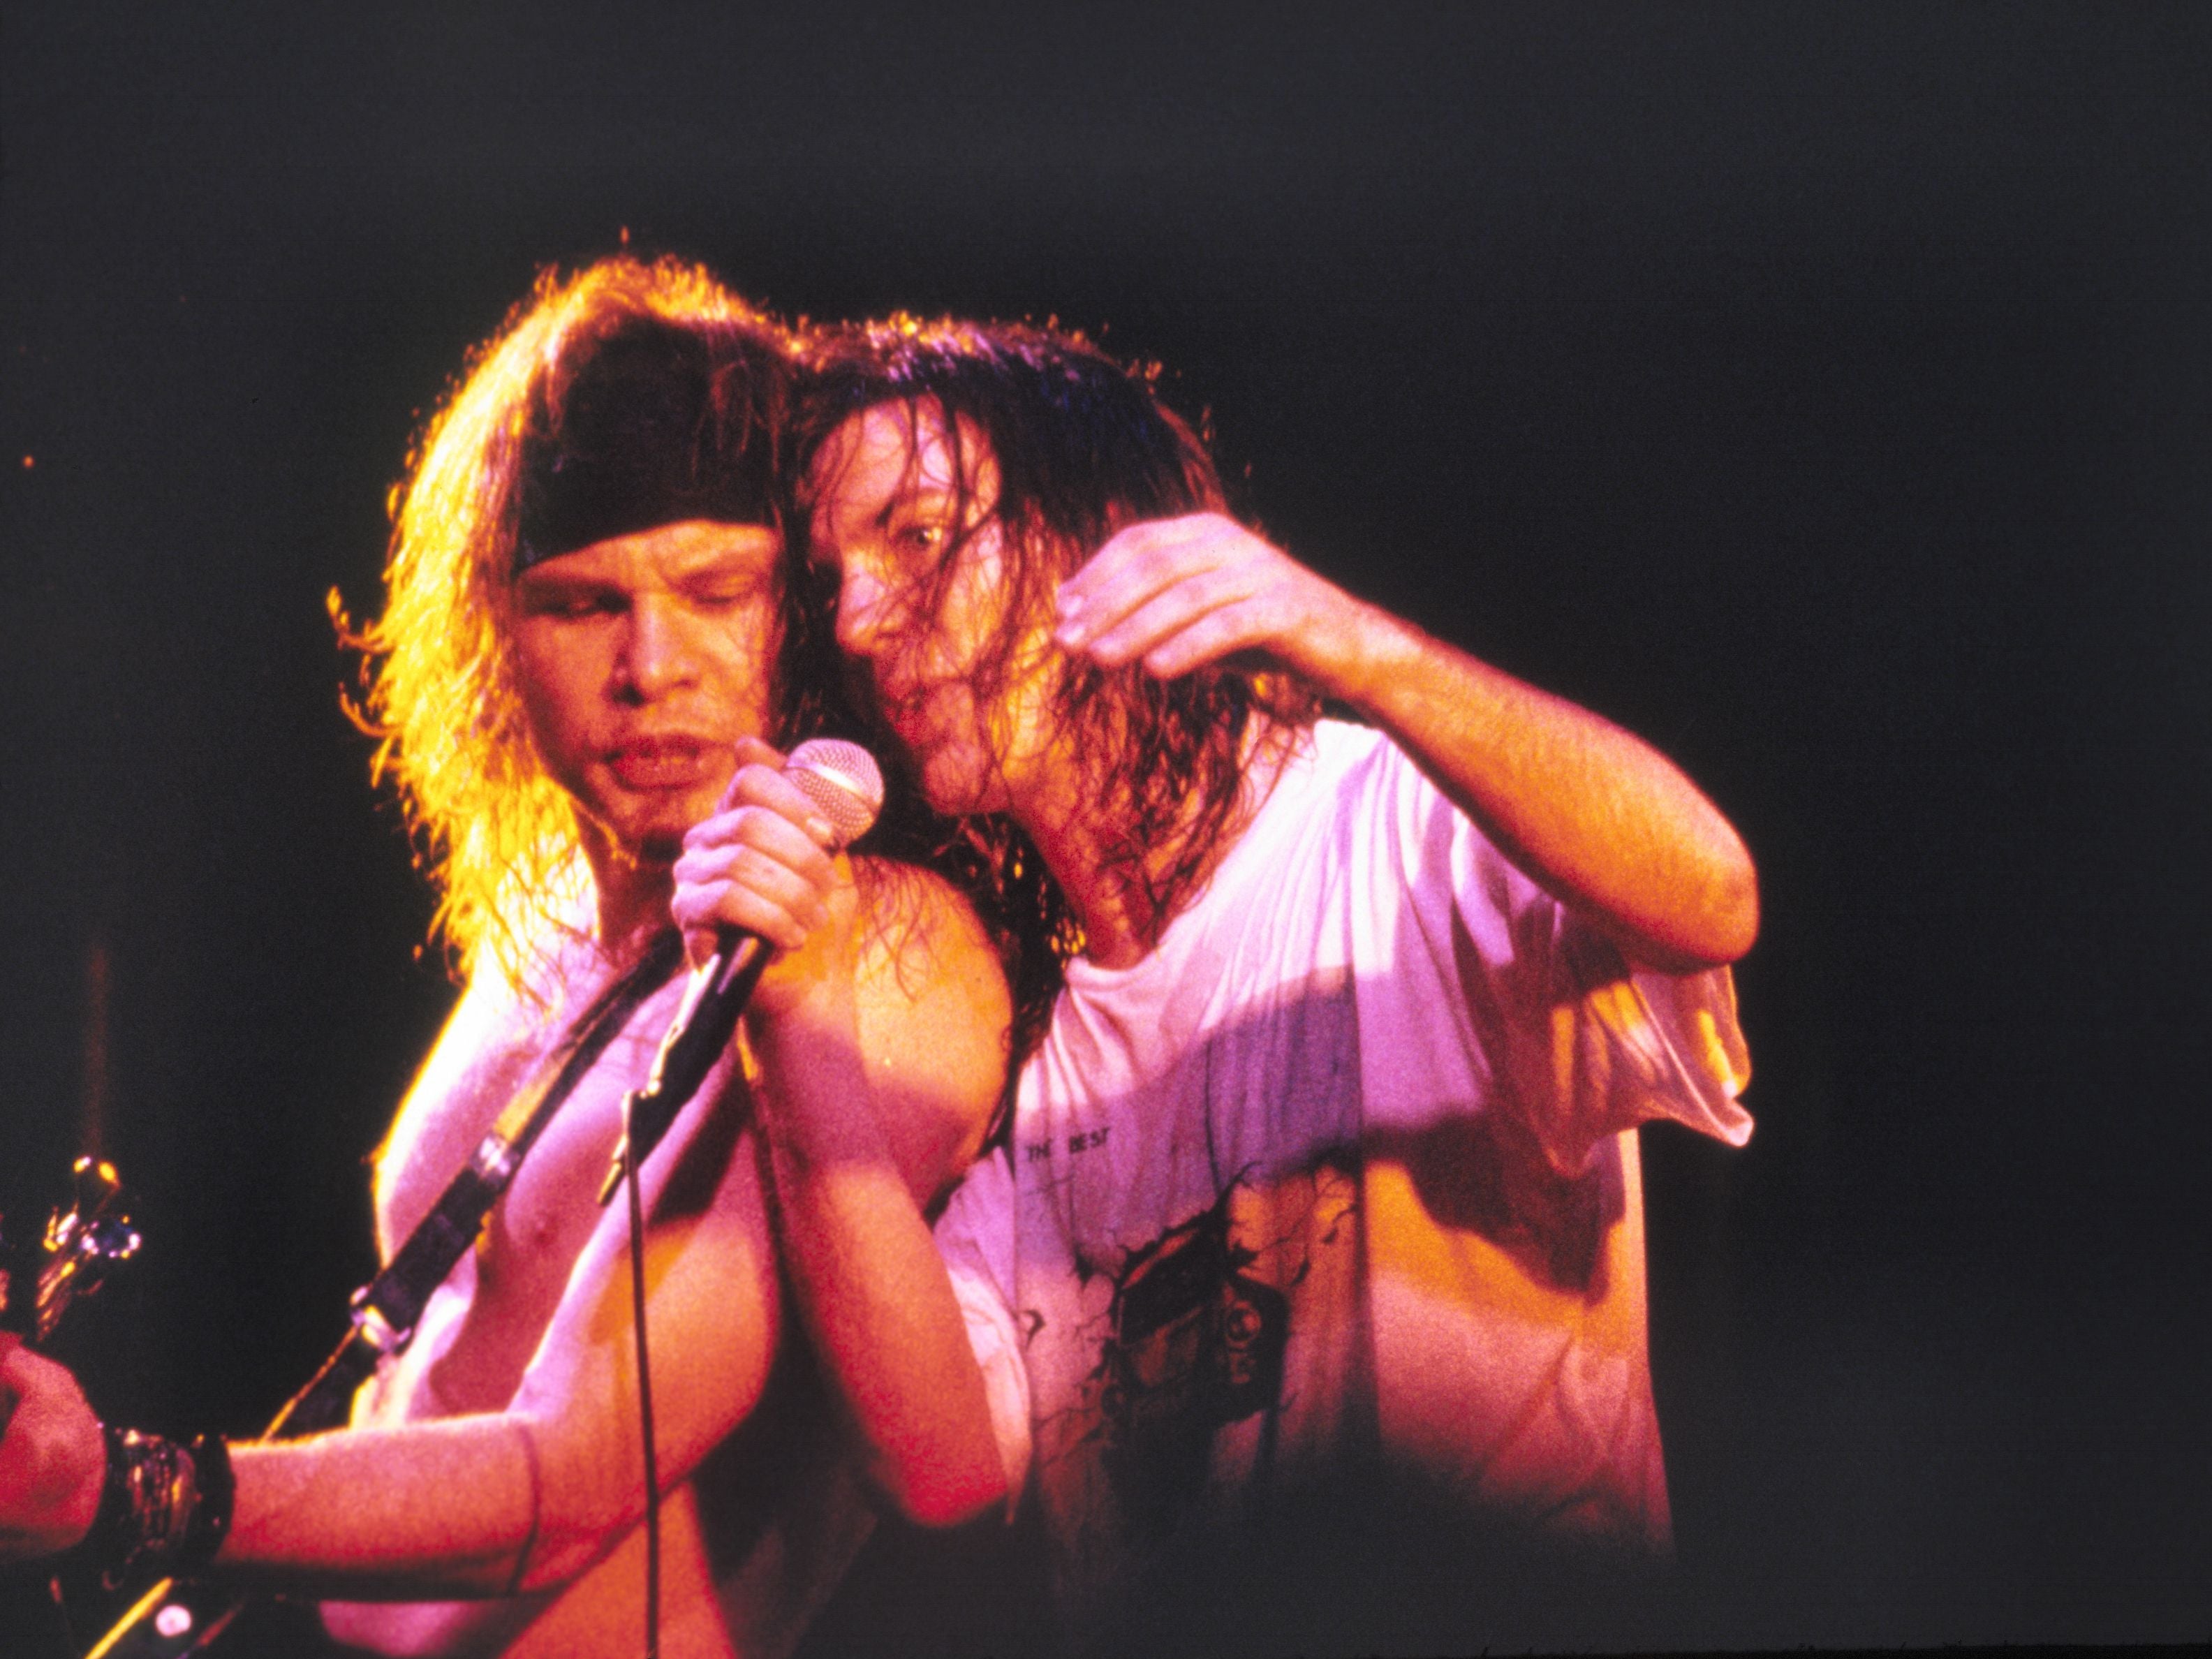 Pearl Jam’s Eddie Vedder (right) and bassist Jeff Ament at London’s Brixton Academy, July 1993